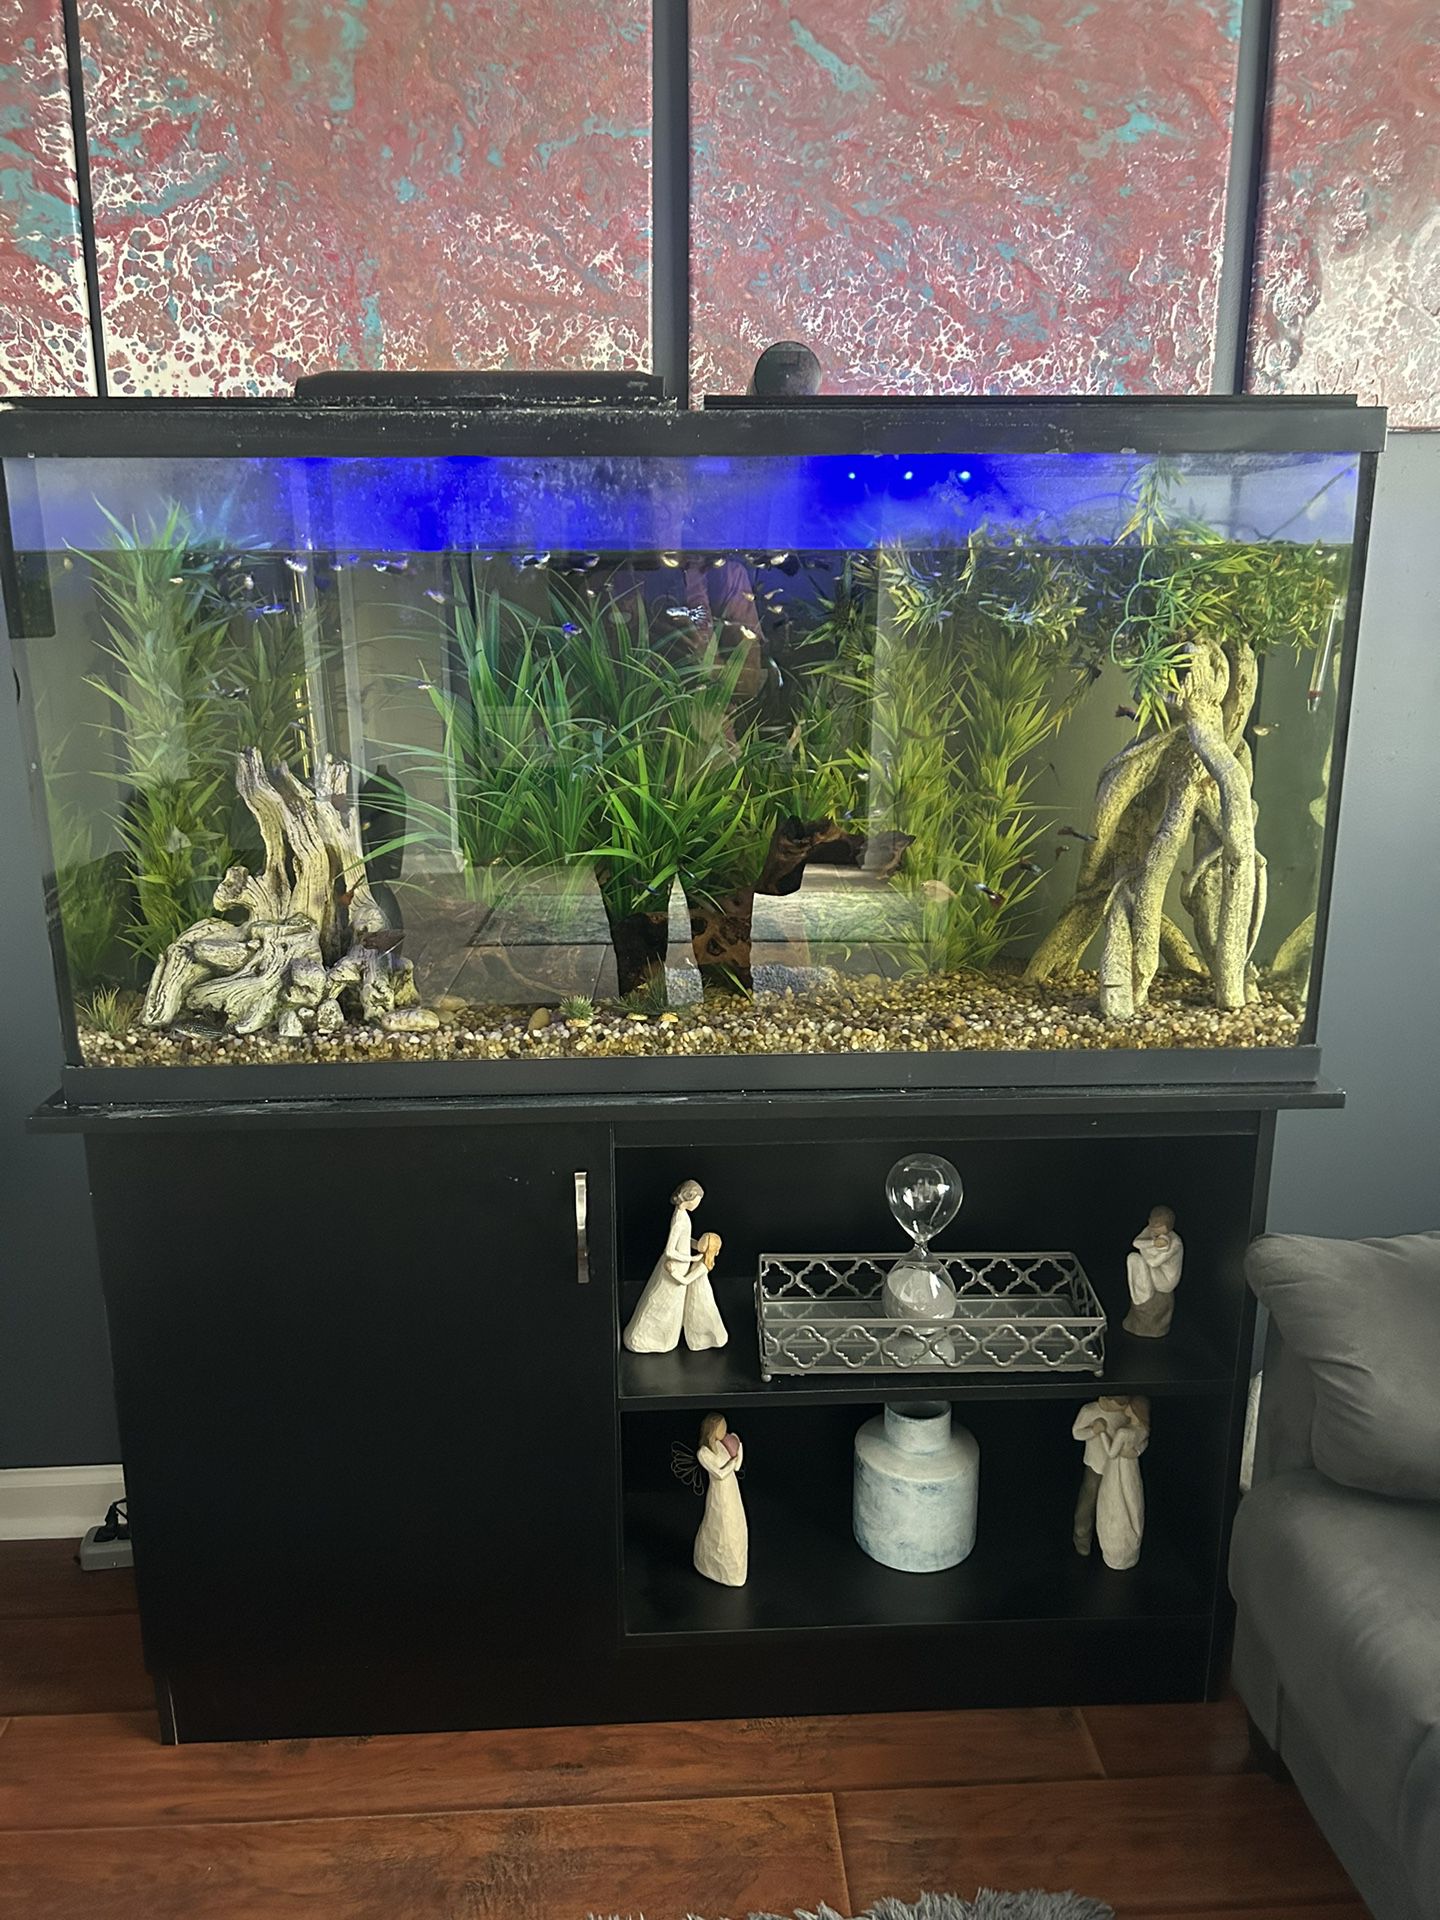 50 -55 Gallon Fish Tank , Stand All Essentials Included, Including Fish